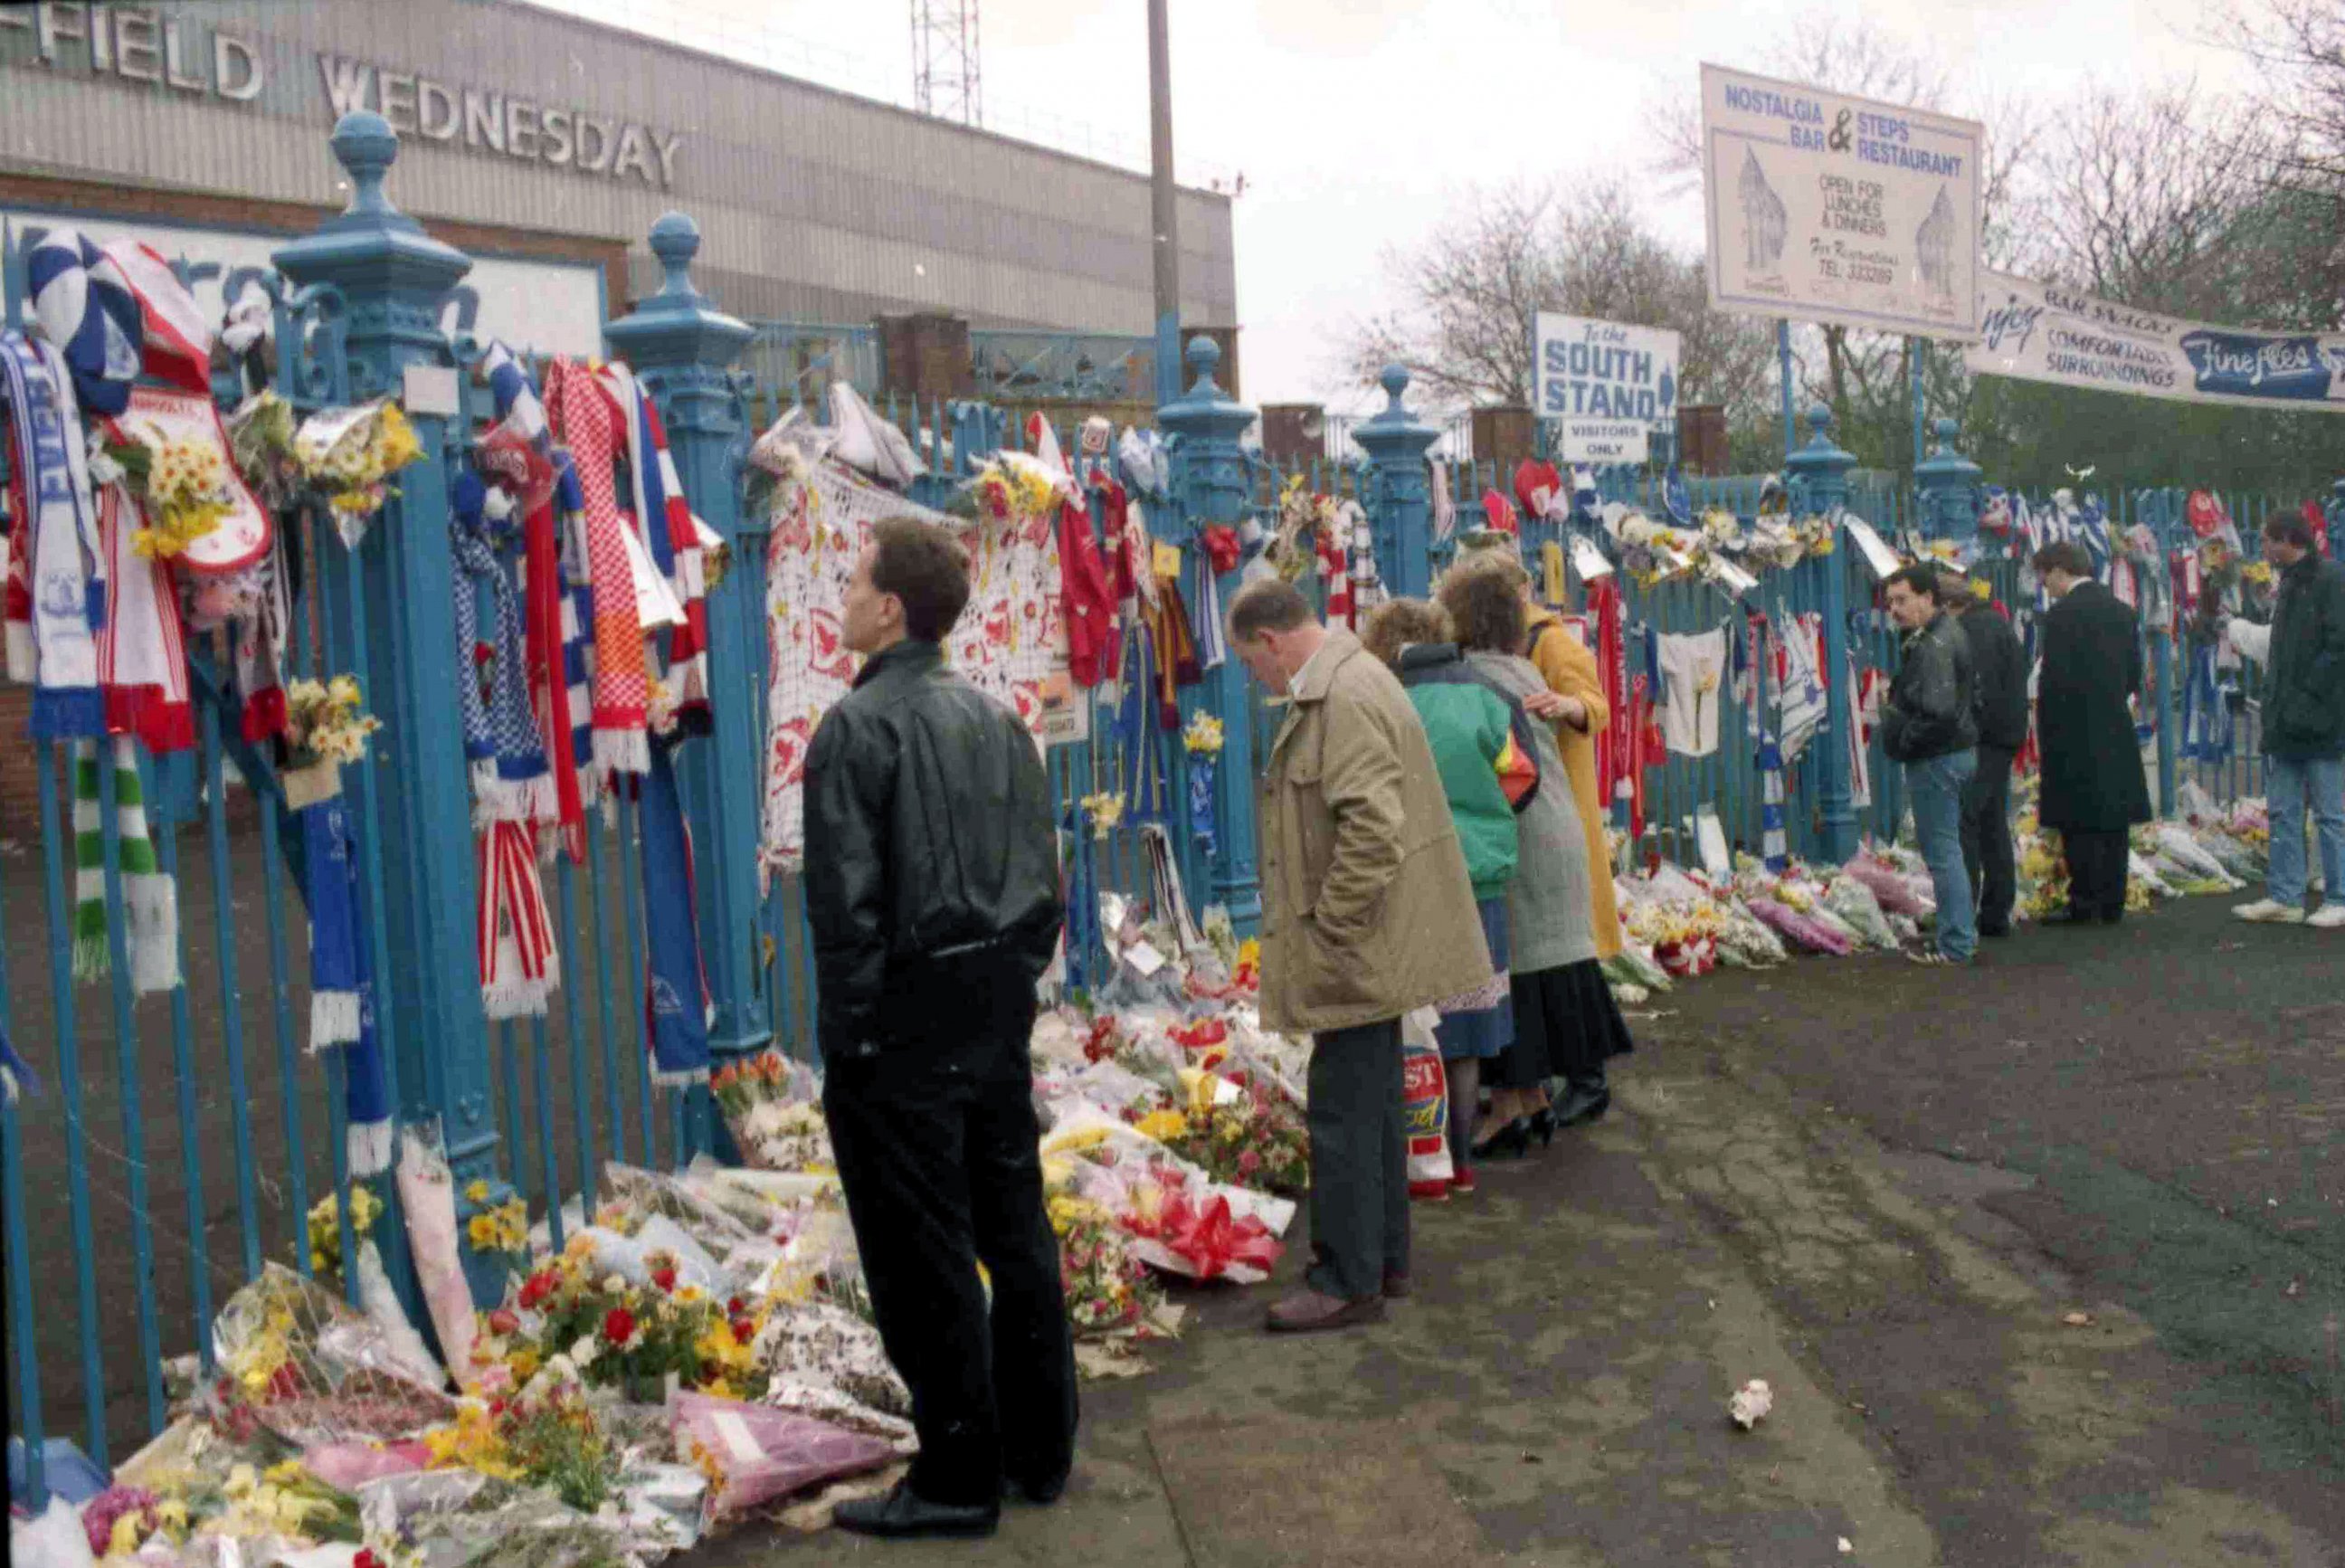 PHOTO: In this file photo dated April 17, 1989, soccer fans arrive to pay their respects at Hillsborough Football Stadium, after the April 15 tragedy when 96 fans were crushed against a barrier when the crowd surged forward during a game.